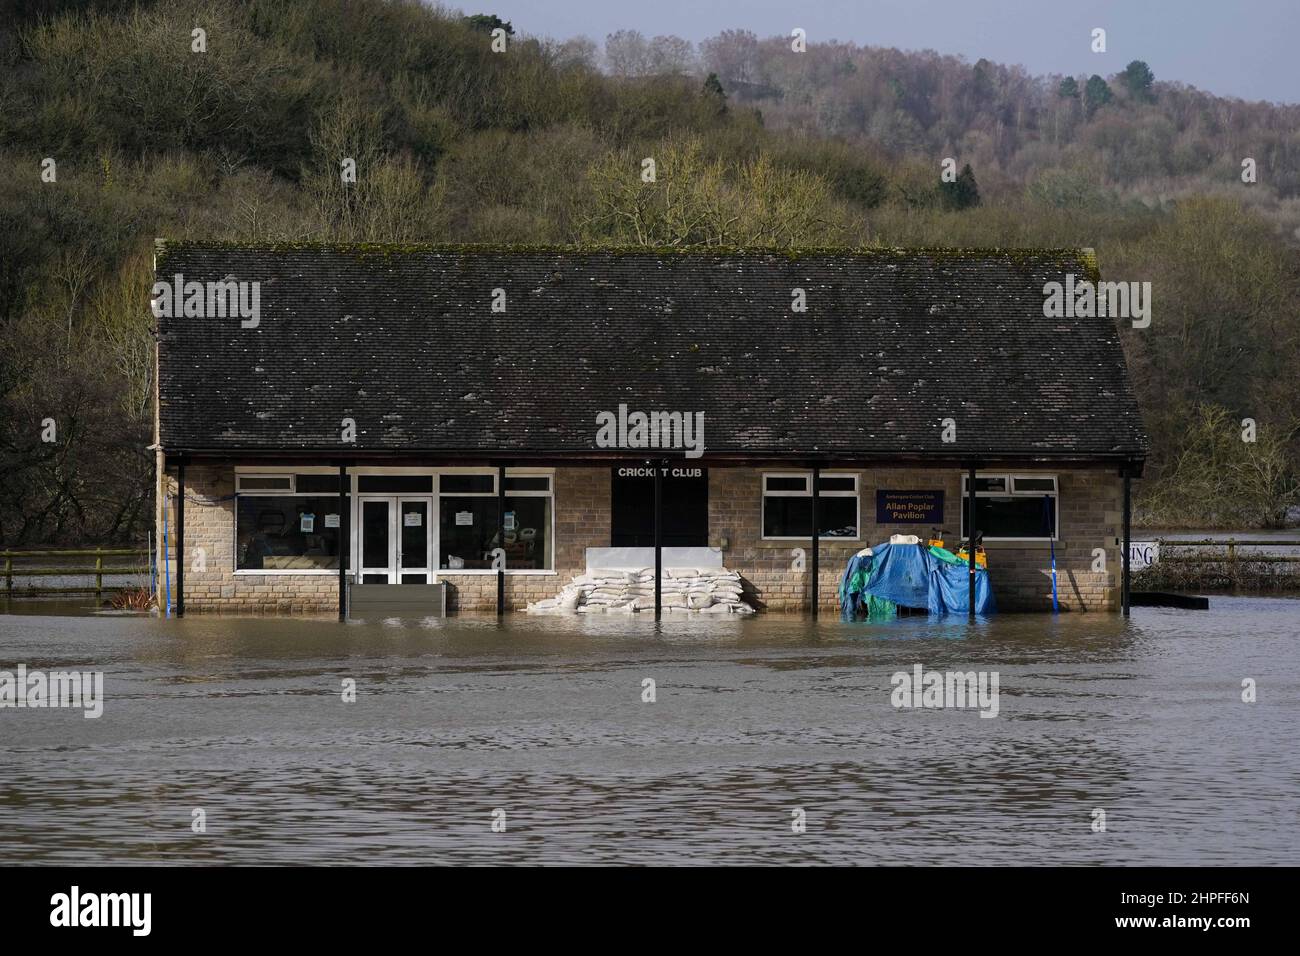 Ambergate Cricket Club is flooded in Belper, Derbyshire, as Britons have been warned to brace for strengthening winds and lashing rain as Storm Franklin moved in overnight, just days after Storm Eunice destroyed buildings and left 1.4 million homes without power. Picture date: Monday February 21, 2022. Stock Photo